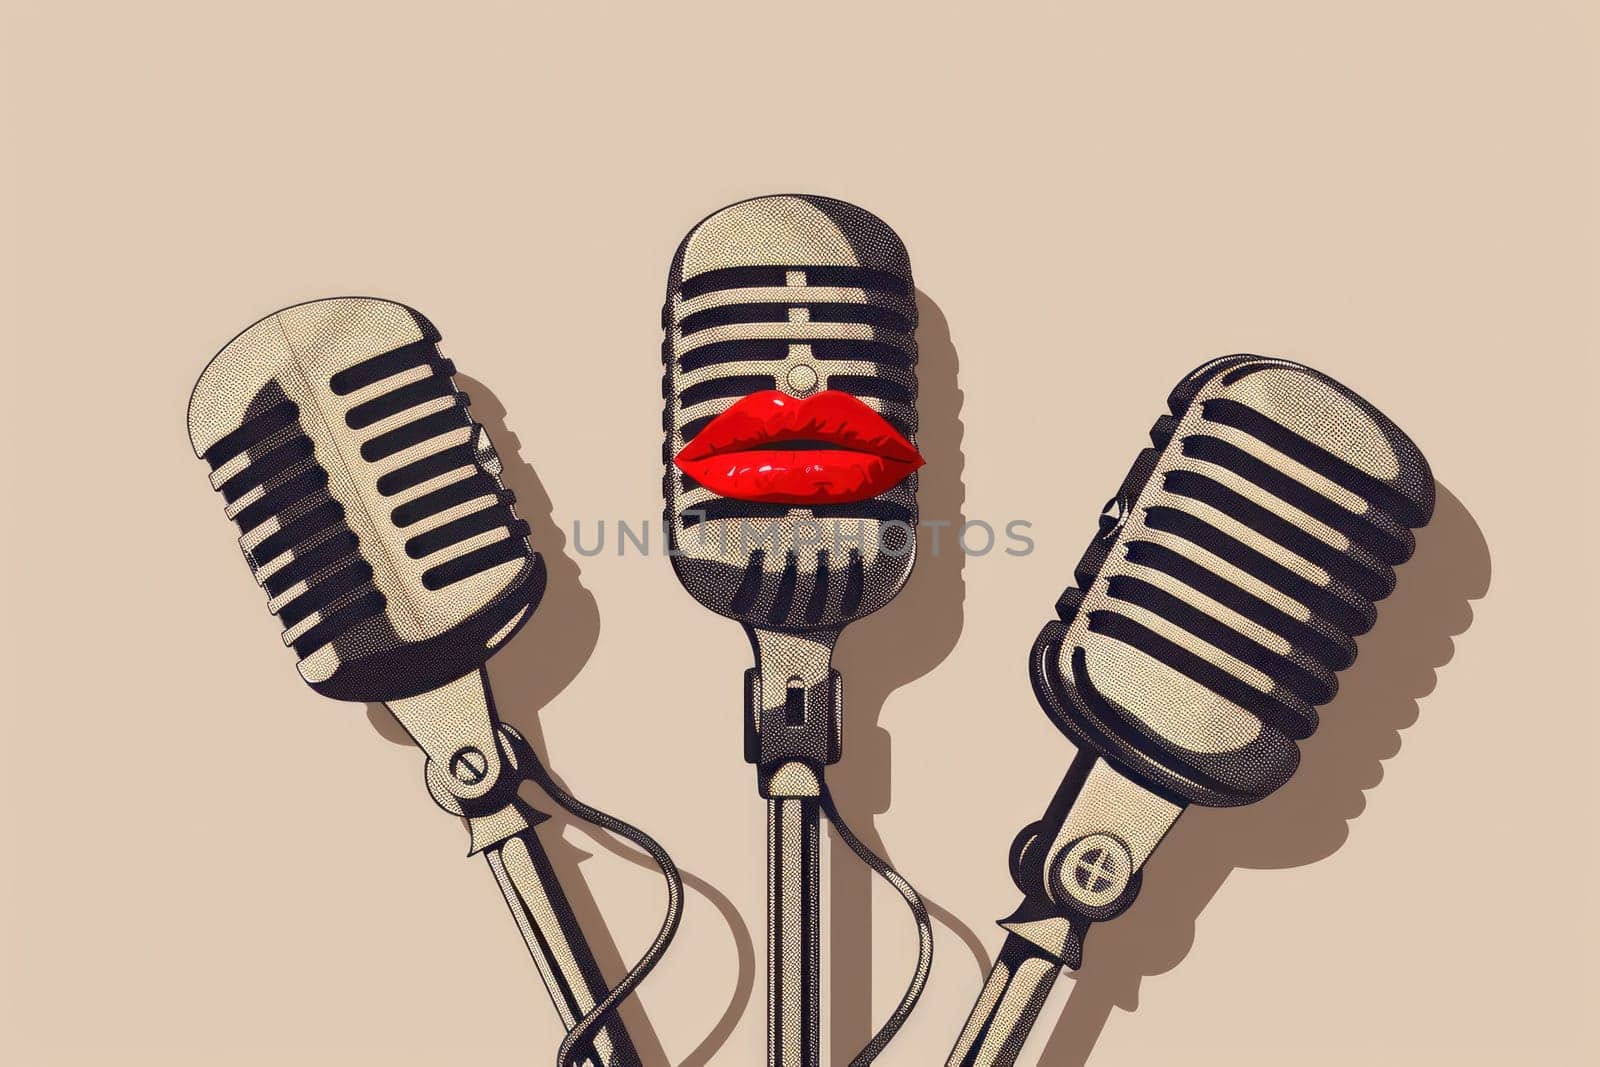 Vintage microphones with red lipstick accents a touch of glamour and nostalgia